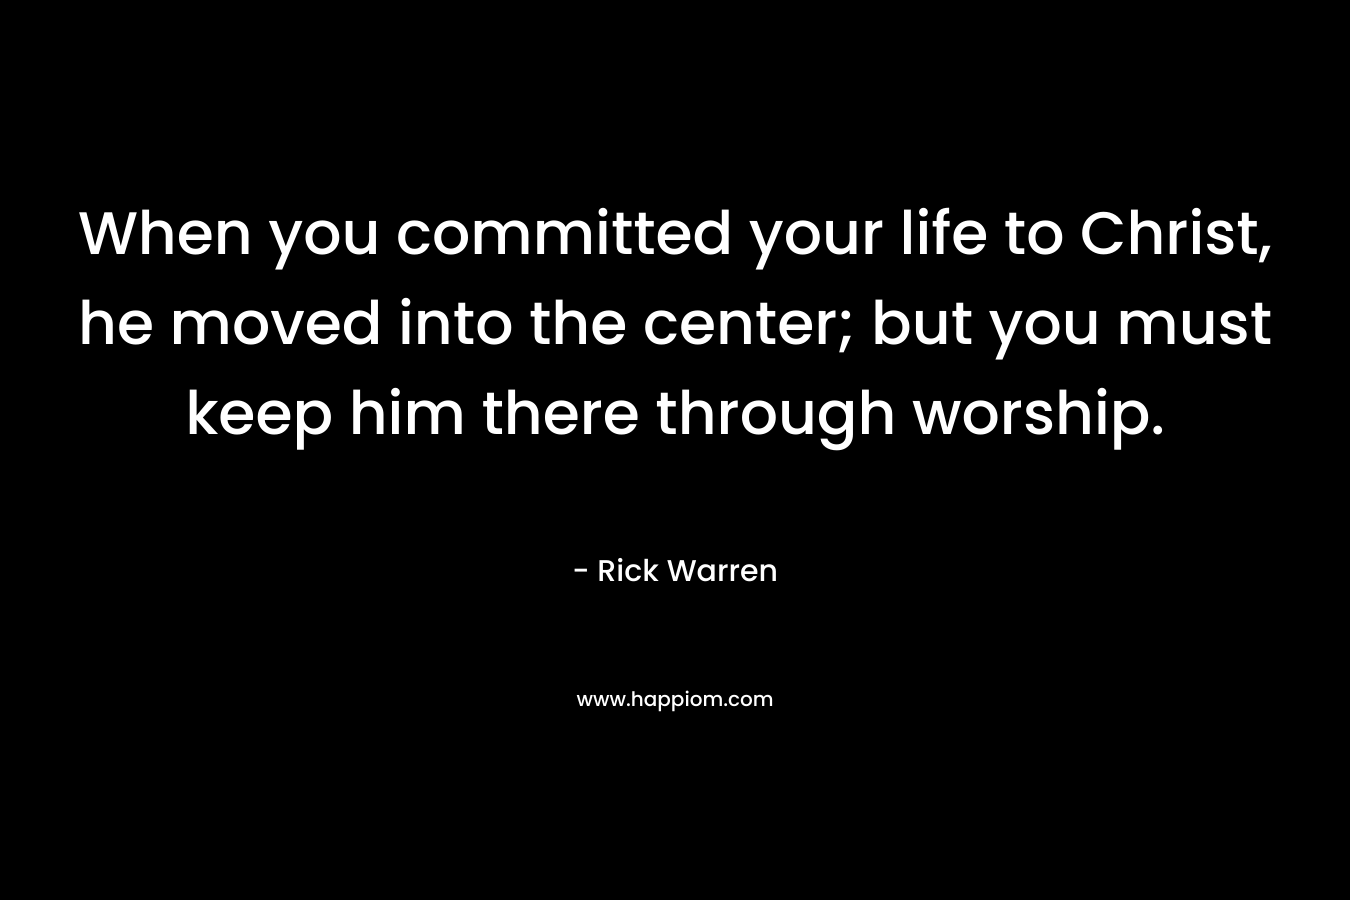 When you committed your life to Christ, he moved into the center; but you must keep him there through worship. – Rick Warren